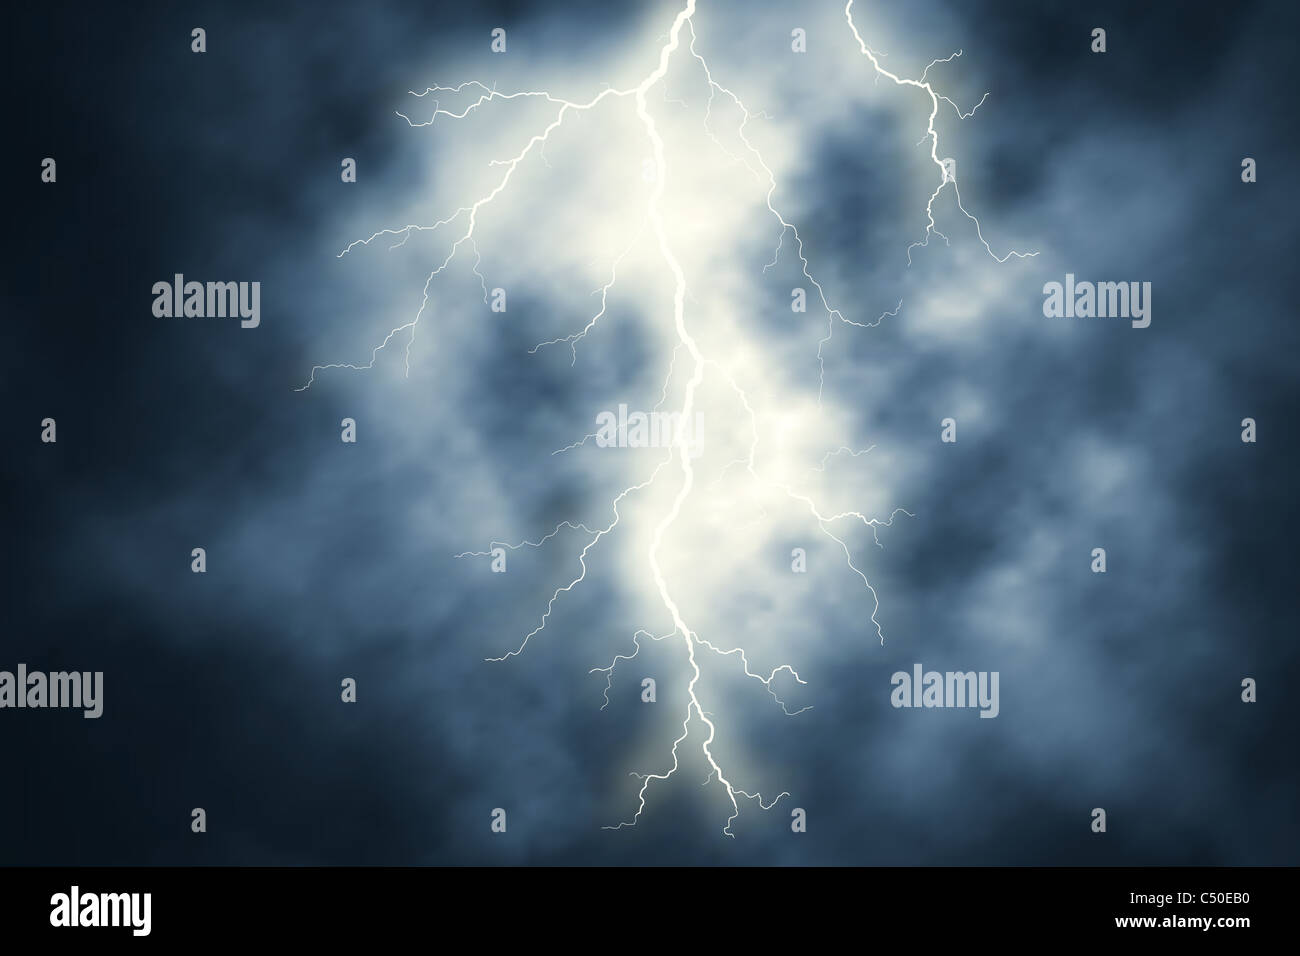 Illustration of a lightning bolt at night with background sky Stock Photo